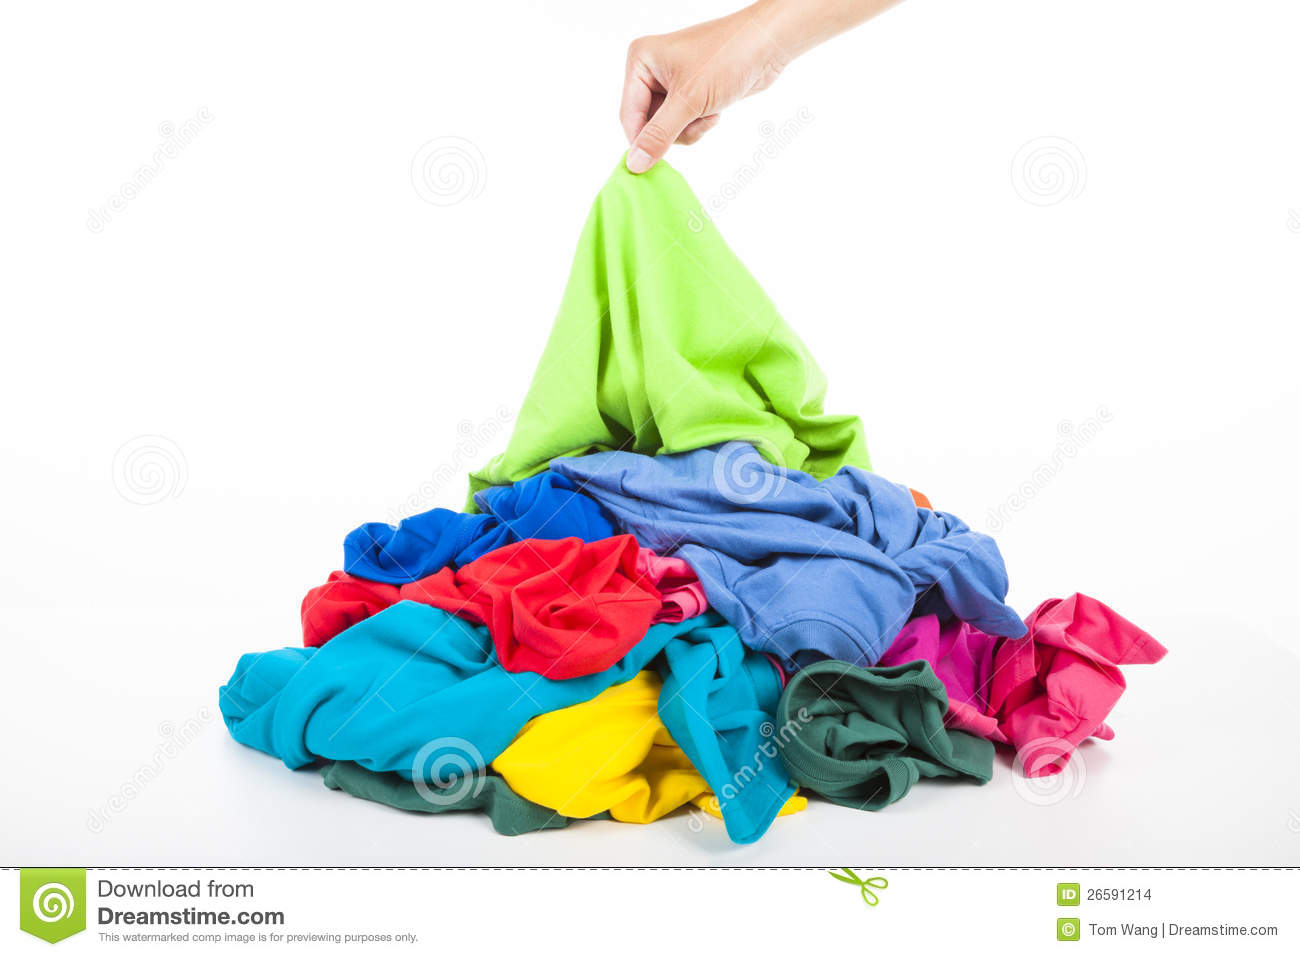 Hand Pick Up Shirt In Pile Of Clothes Stock Images   Image  26591214